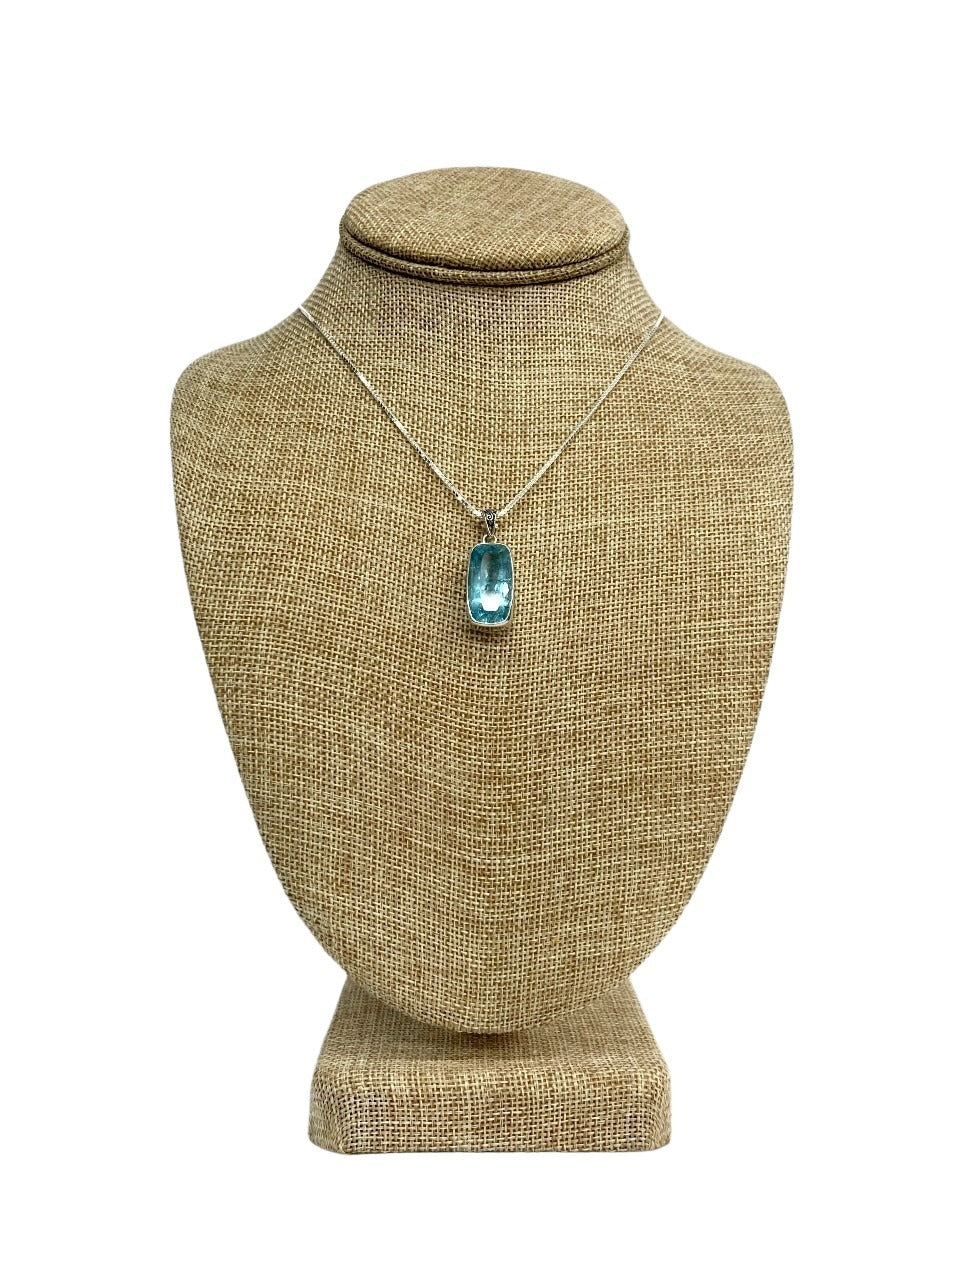 Aquamarine Pendant And Sterling Silver Necklace